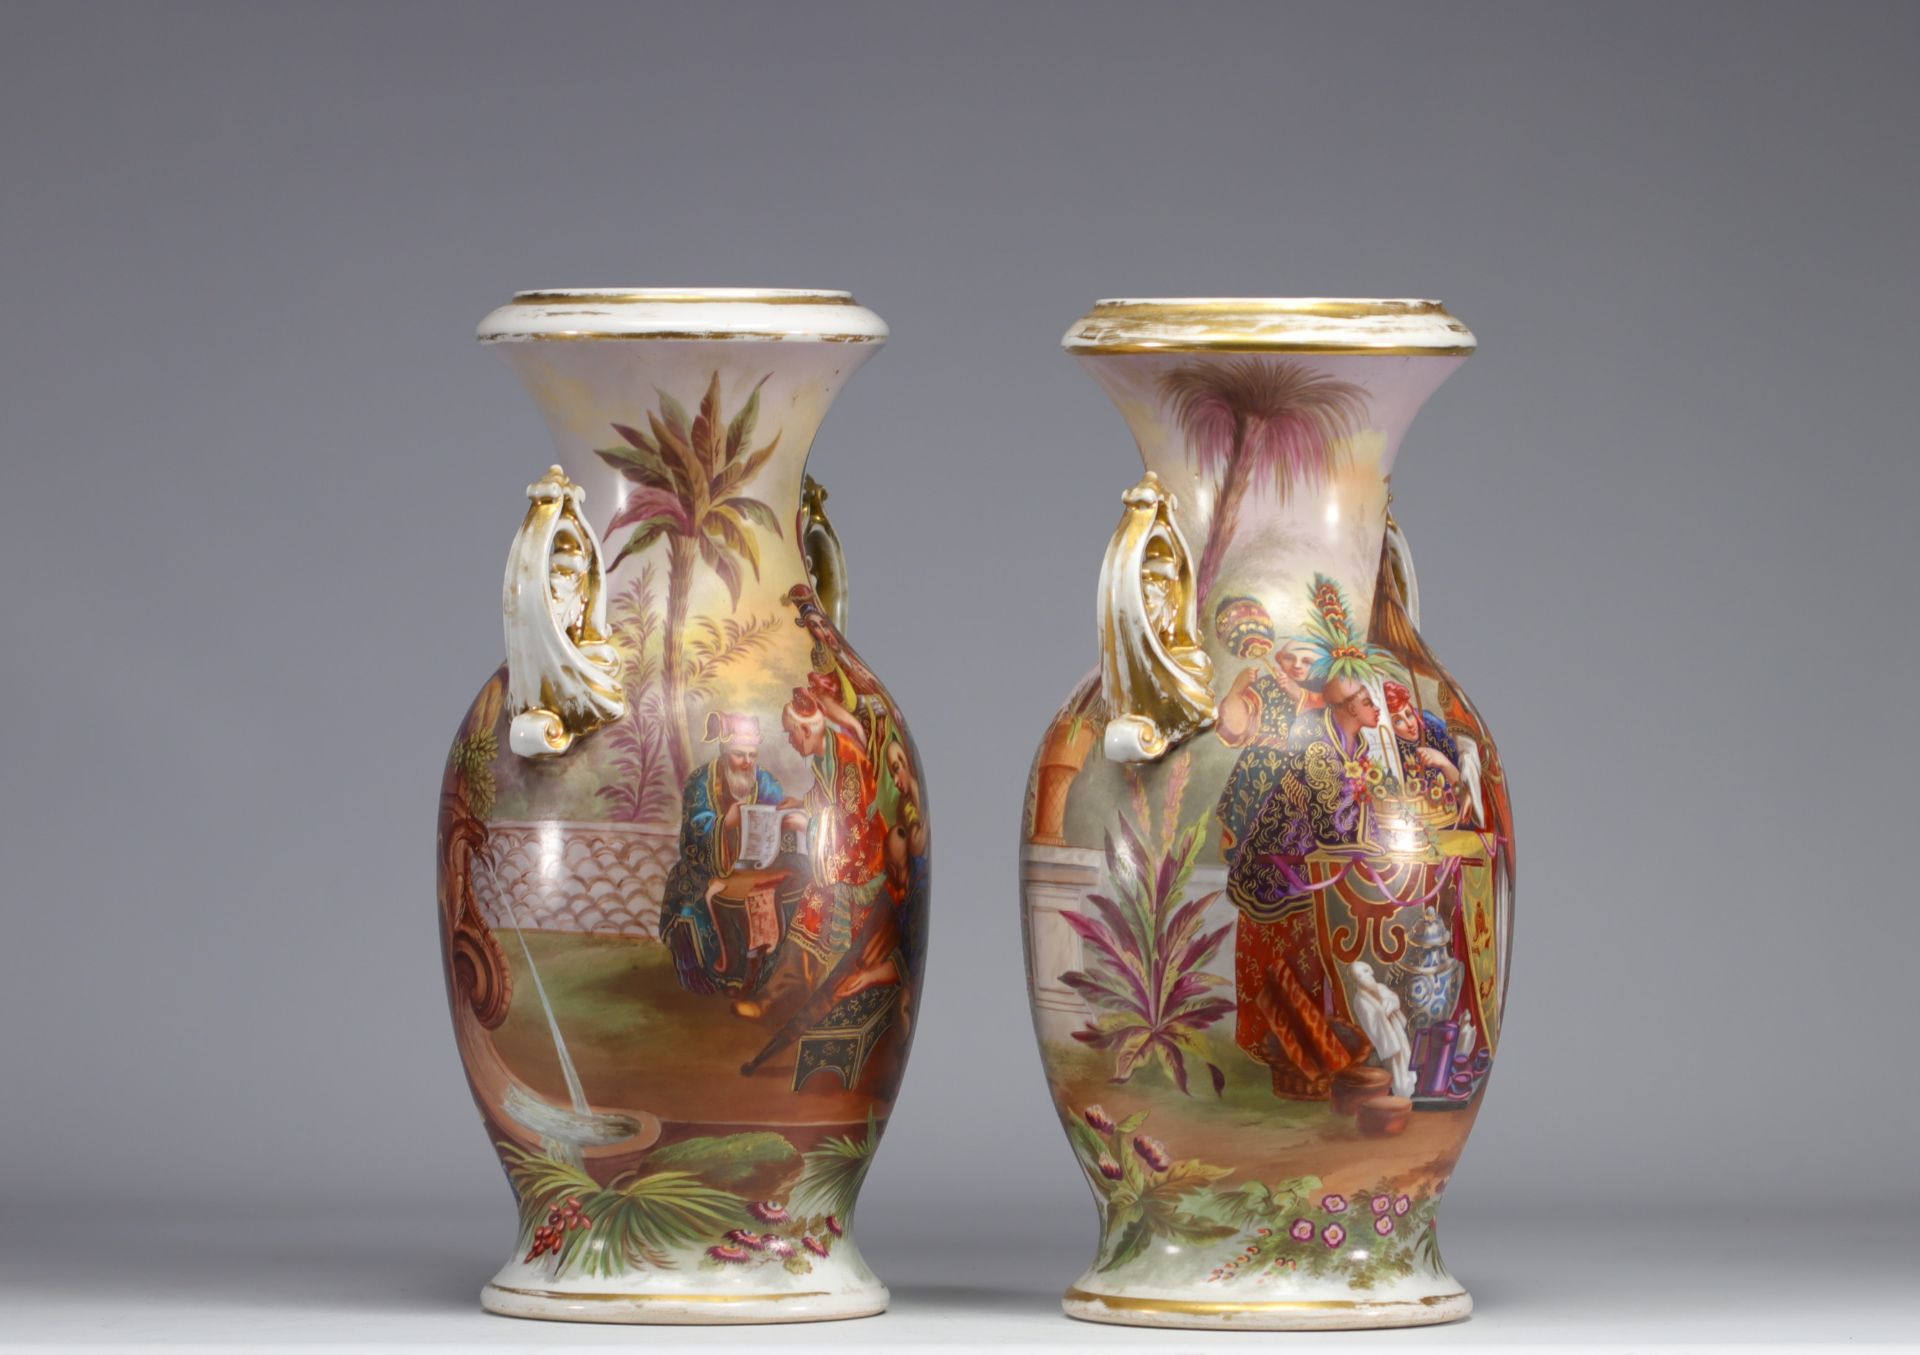 Pair of 19th century porcelain of Paris vases with a rich Asian decoration. - Image 4 of 6